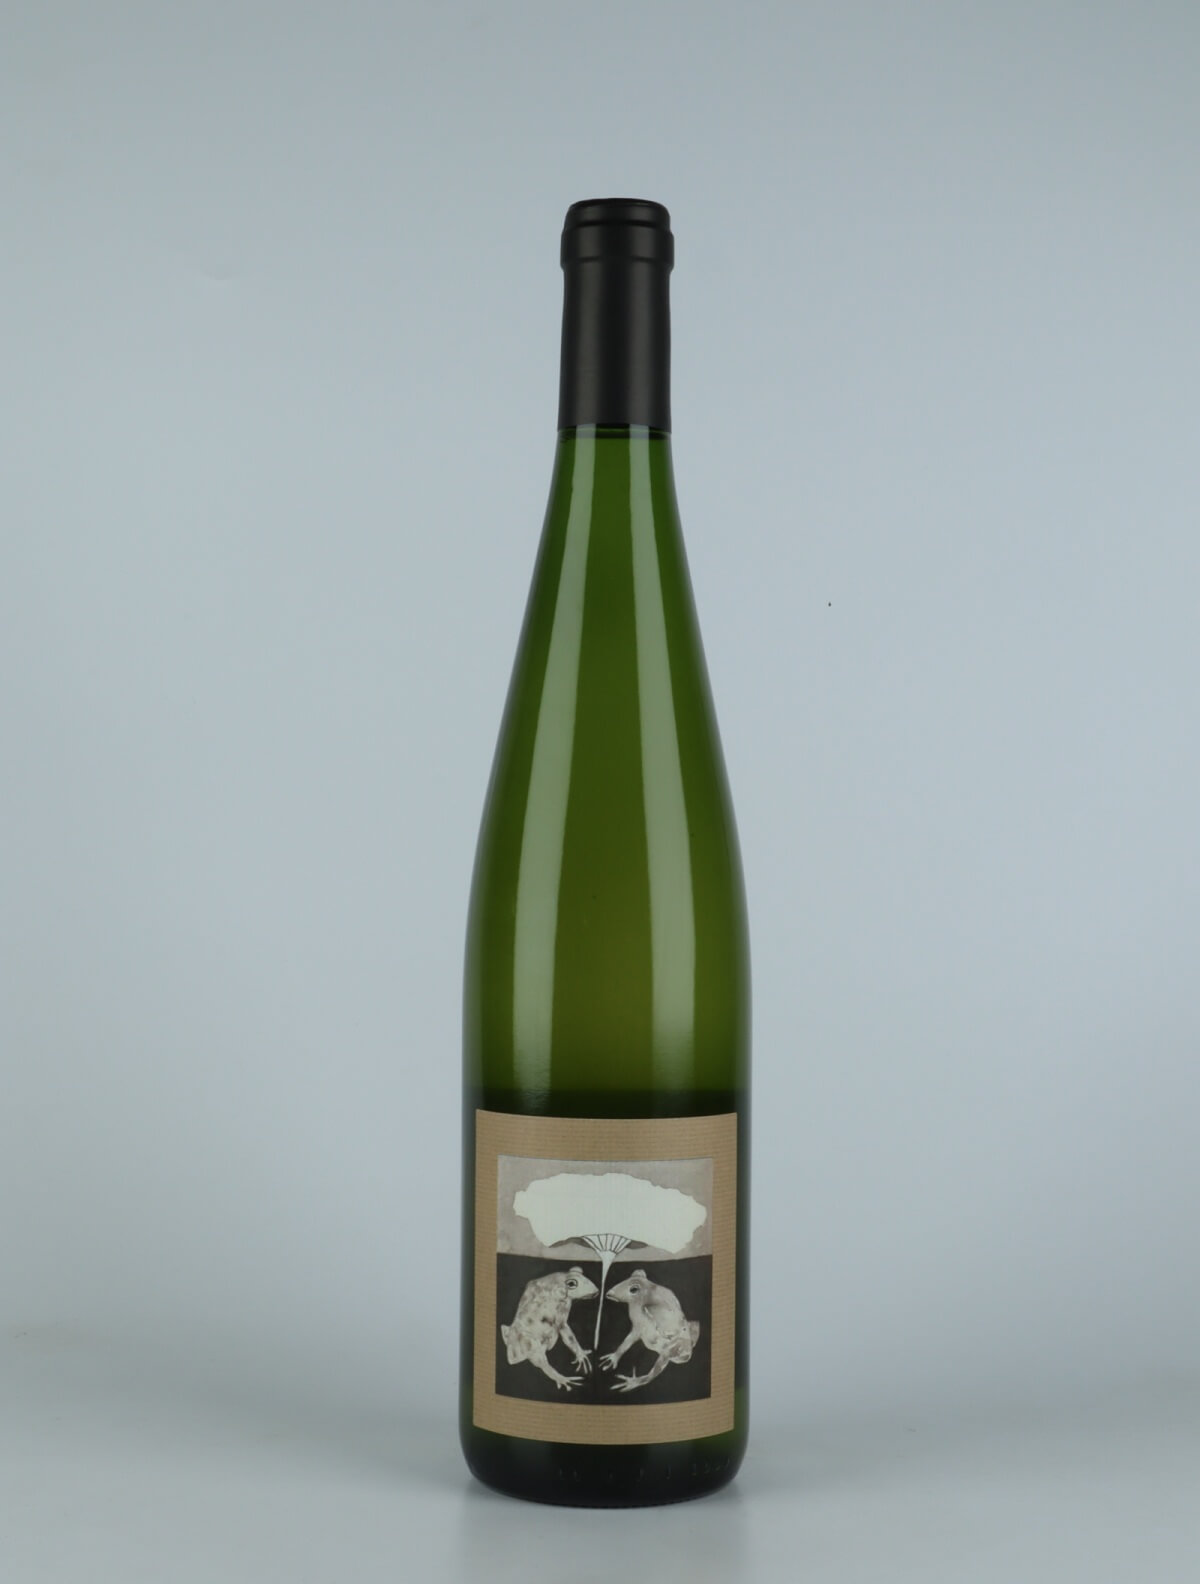 A bottle 2021 Murmure Orange wine from Domaine Rietsch, Alsace in France